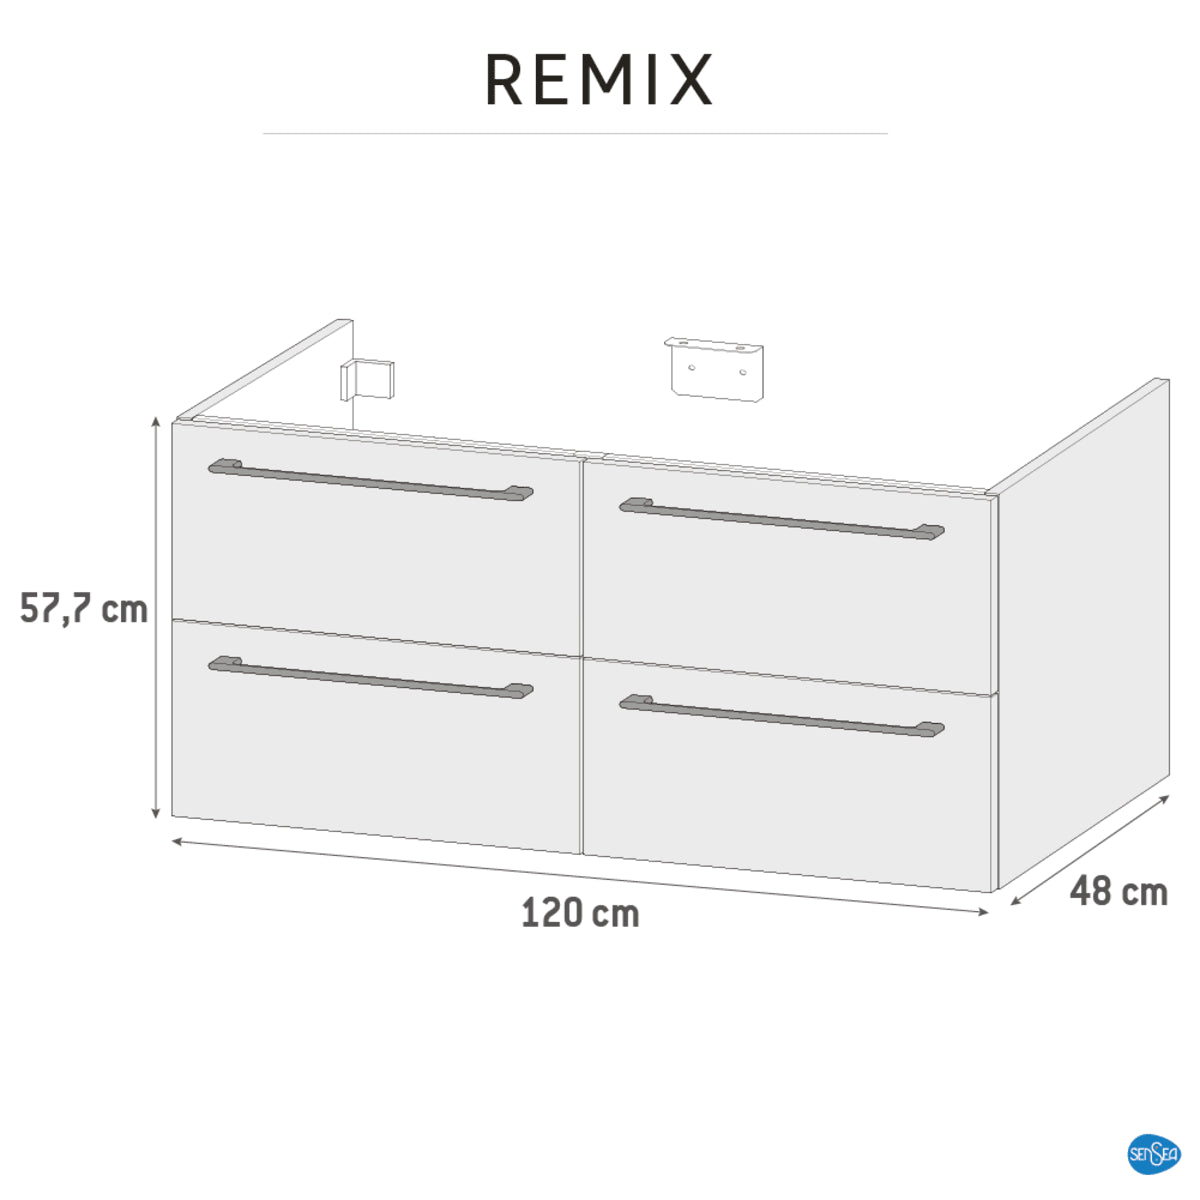 CABINET REMIX 120 4 DRAWERS GLOSSY WHITE W120 H58 D46